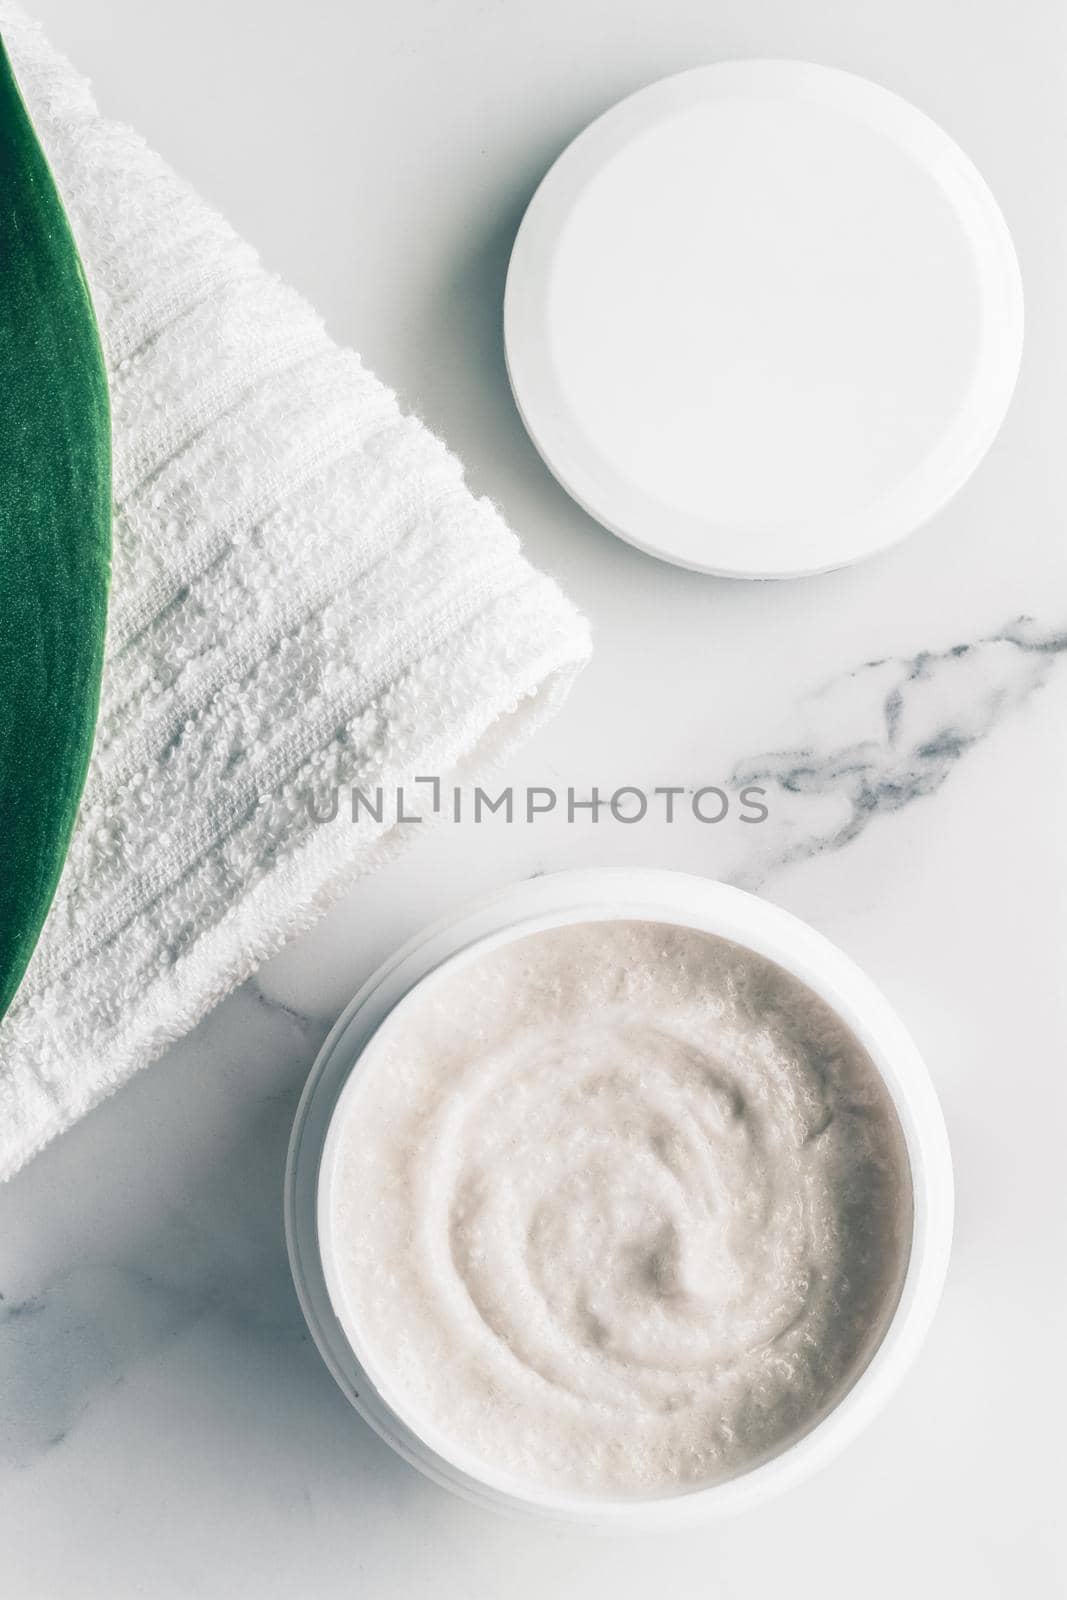 Skincare and body care, luxury spa and clean products concept - organic beauty cosmetics on marble, home spa flatlay background